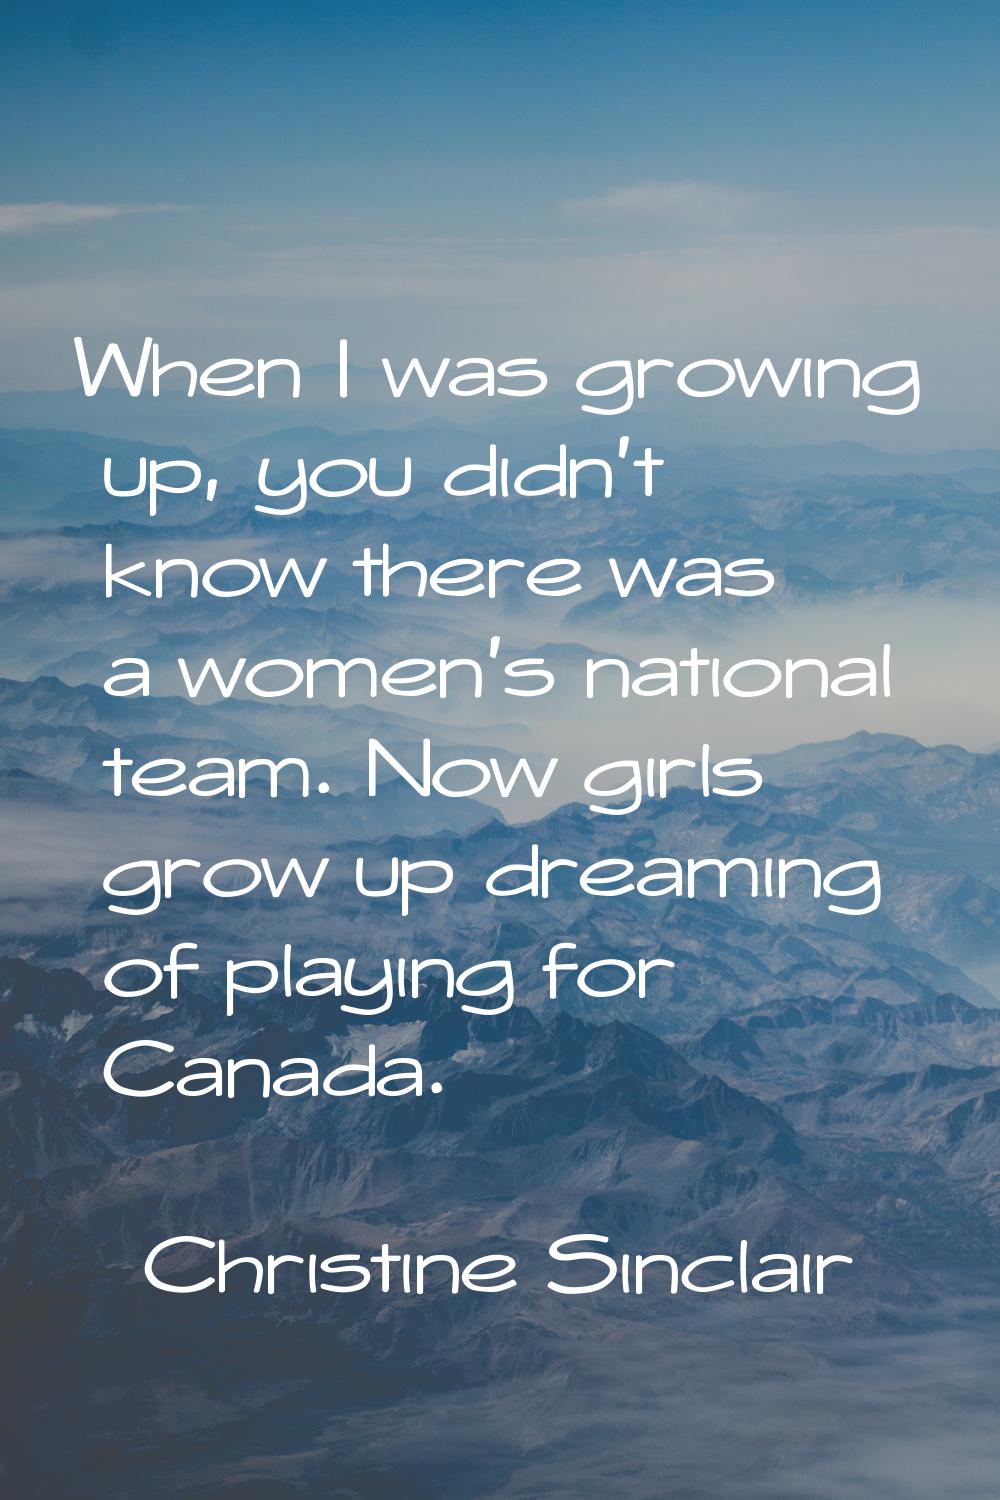 When I was growing up, you didn't know there was a women's national team. Now girls grow up dreamin